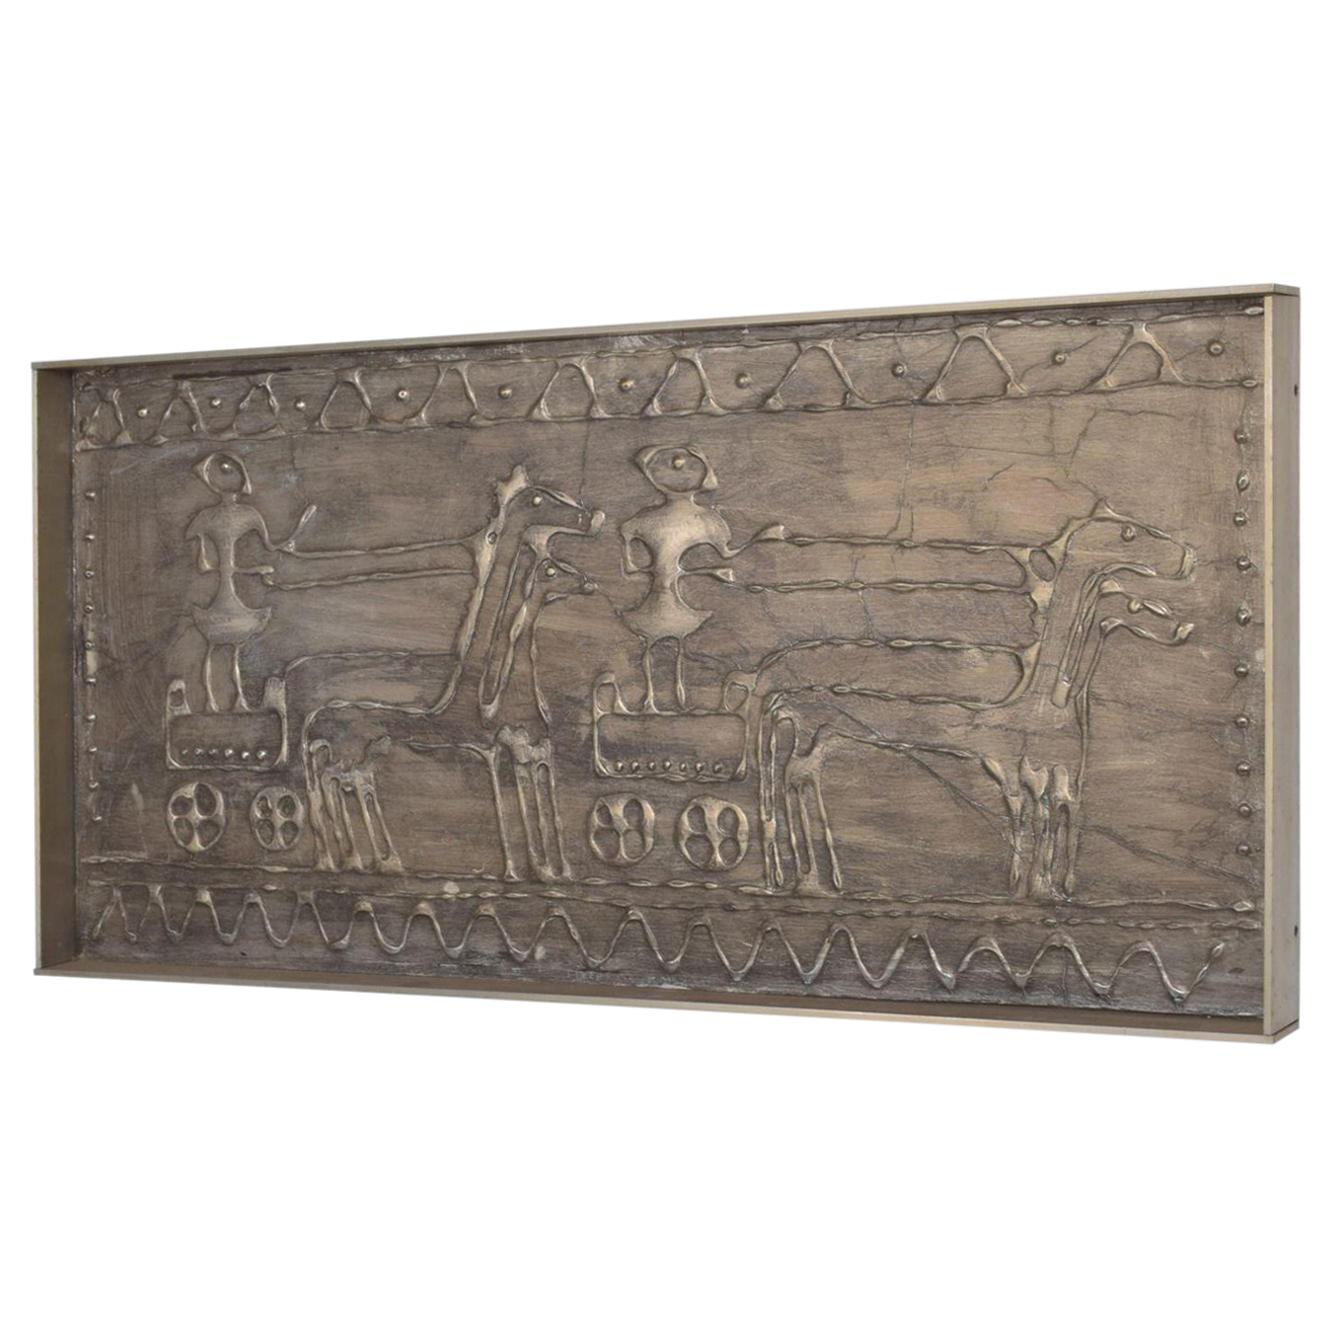 AMBIANIC offers
Abstract mixed-media textured Wall Art Plaque depicts rider horses and wagon aluminum on wood, patinated texture.
Unsigned. No information on the artist.
In the style of Paul Evans.
34 1/8